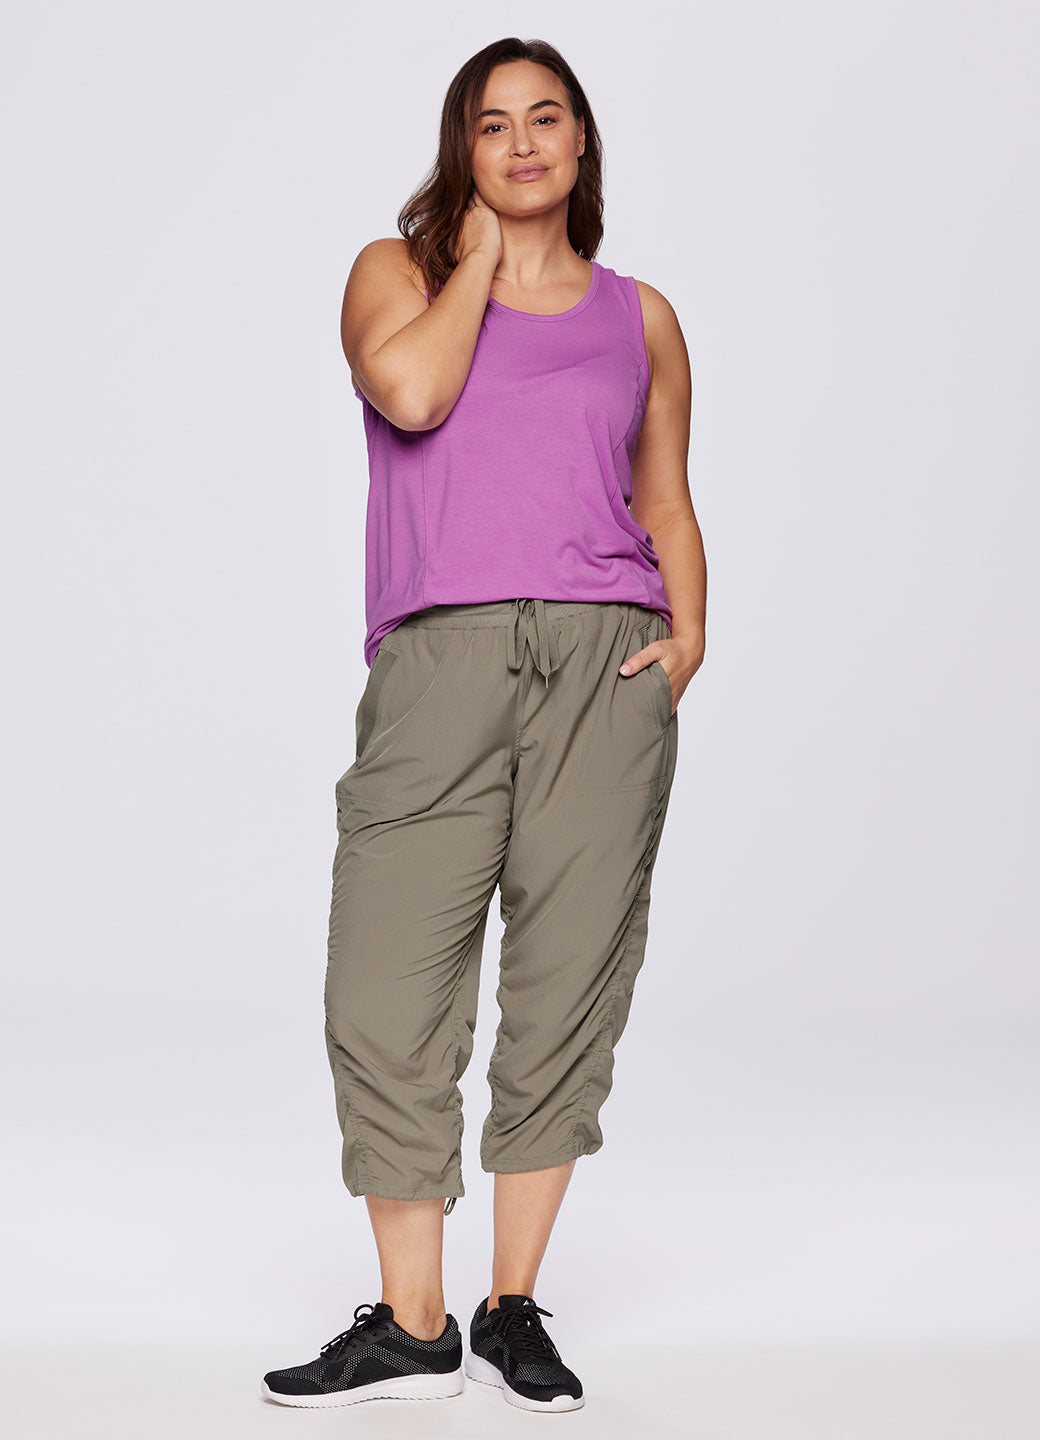 Shop The Outfits – RBX Active